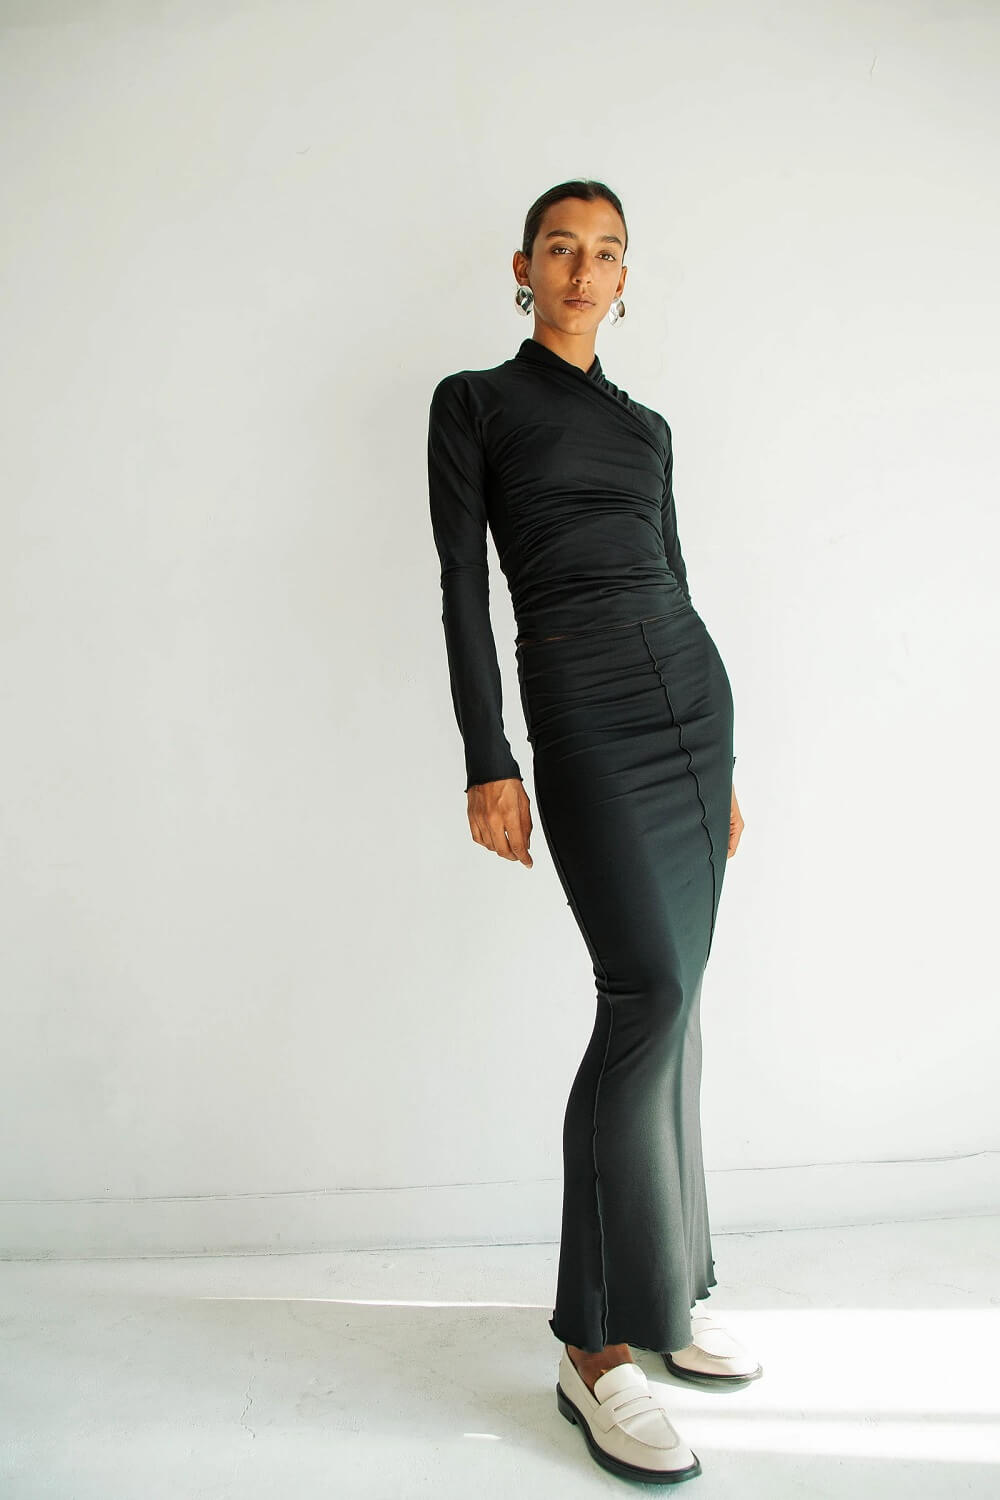 The Line By K Vana Skirt in Black from The New Trend